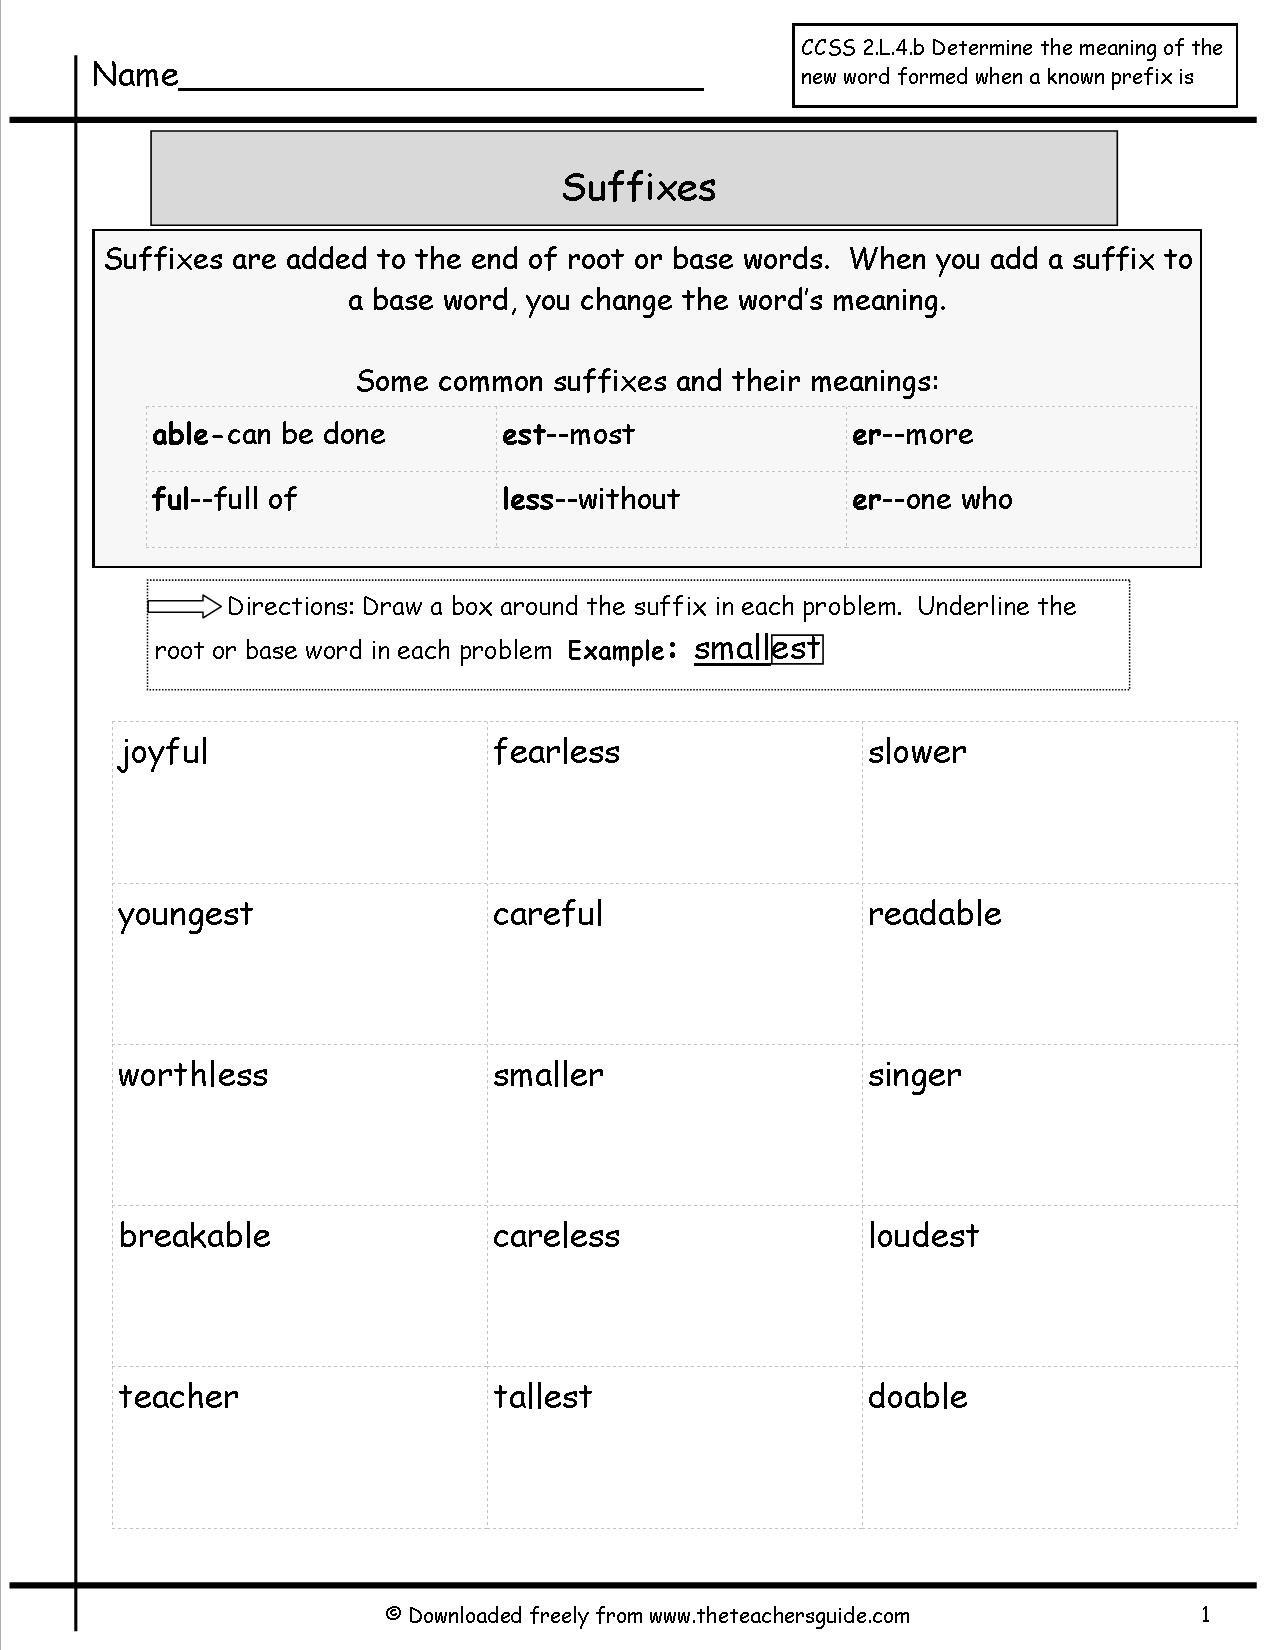 Suffixes Worksheets 4th Grade Free Prefixes and Suffixes Worksheets From the Teacher S Guide